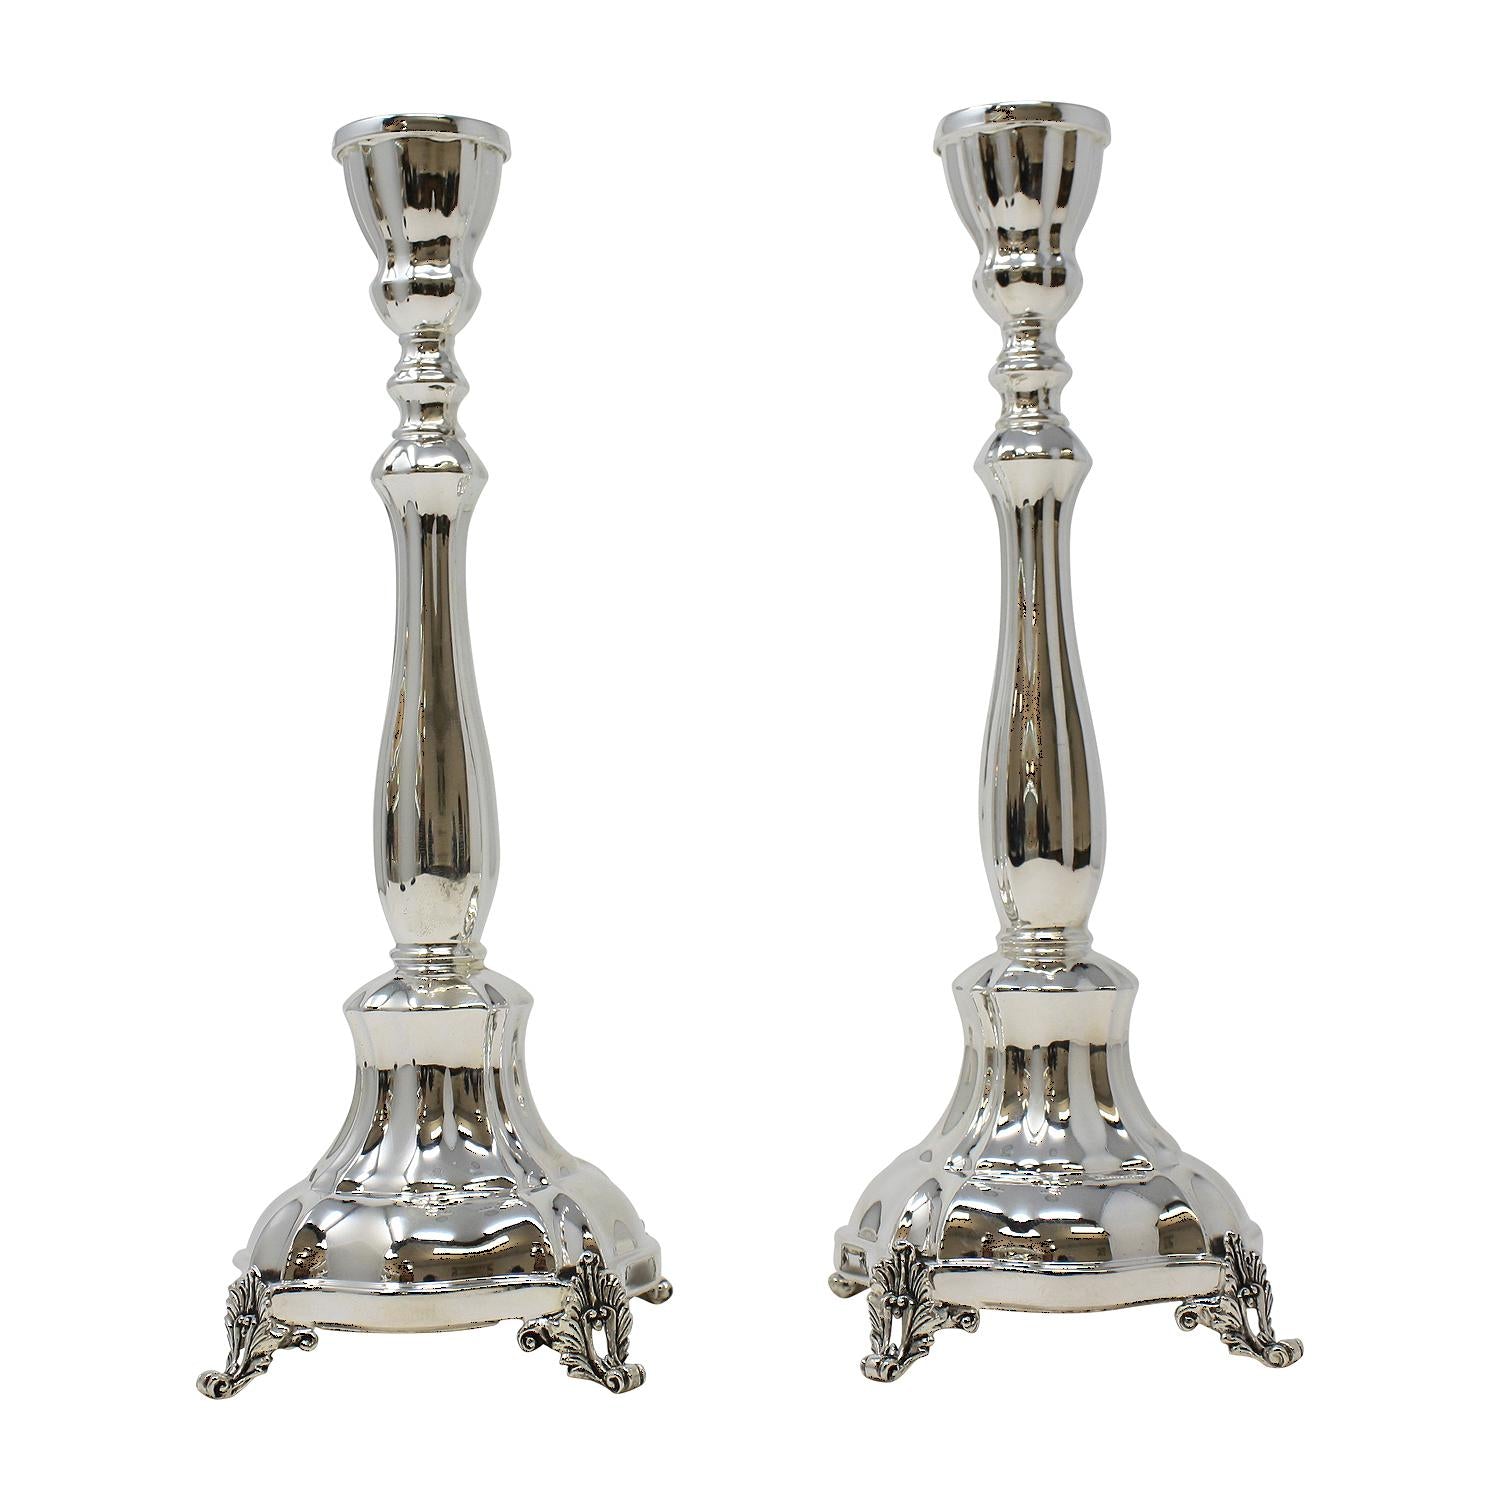 Sterling silver candlestick